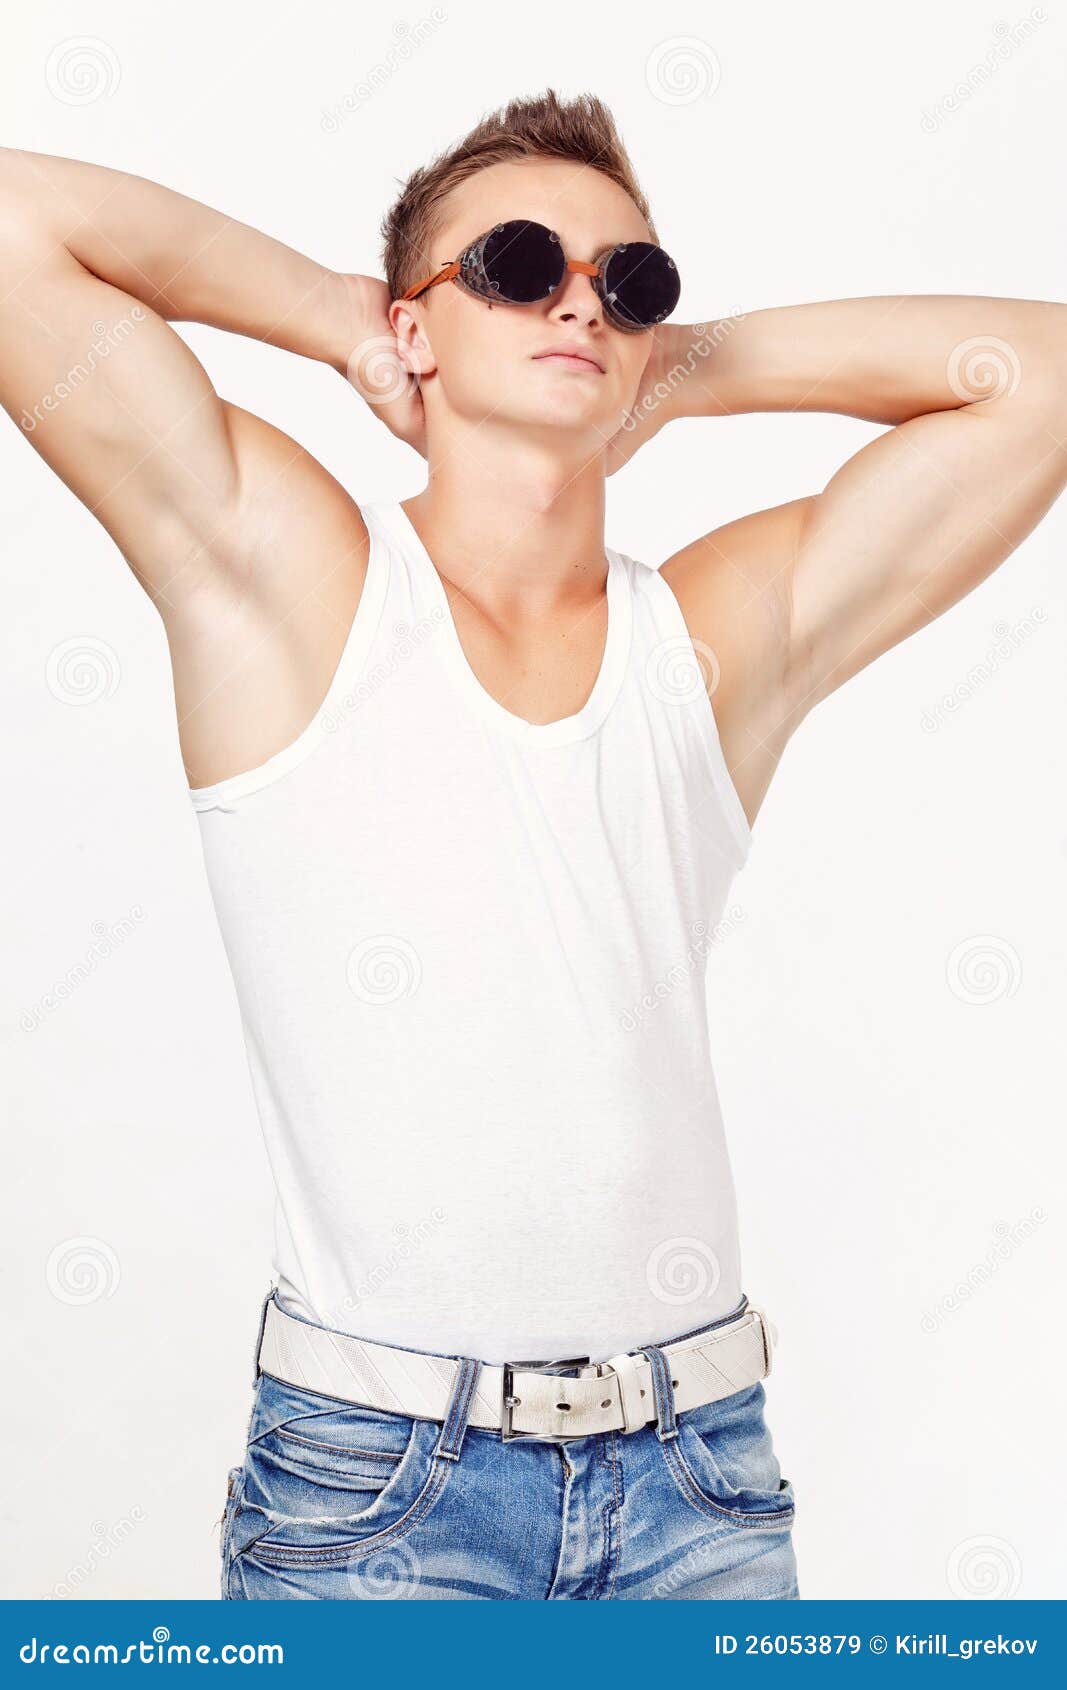 Muscular man stock image. Image of human, attractive - 26053879